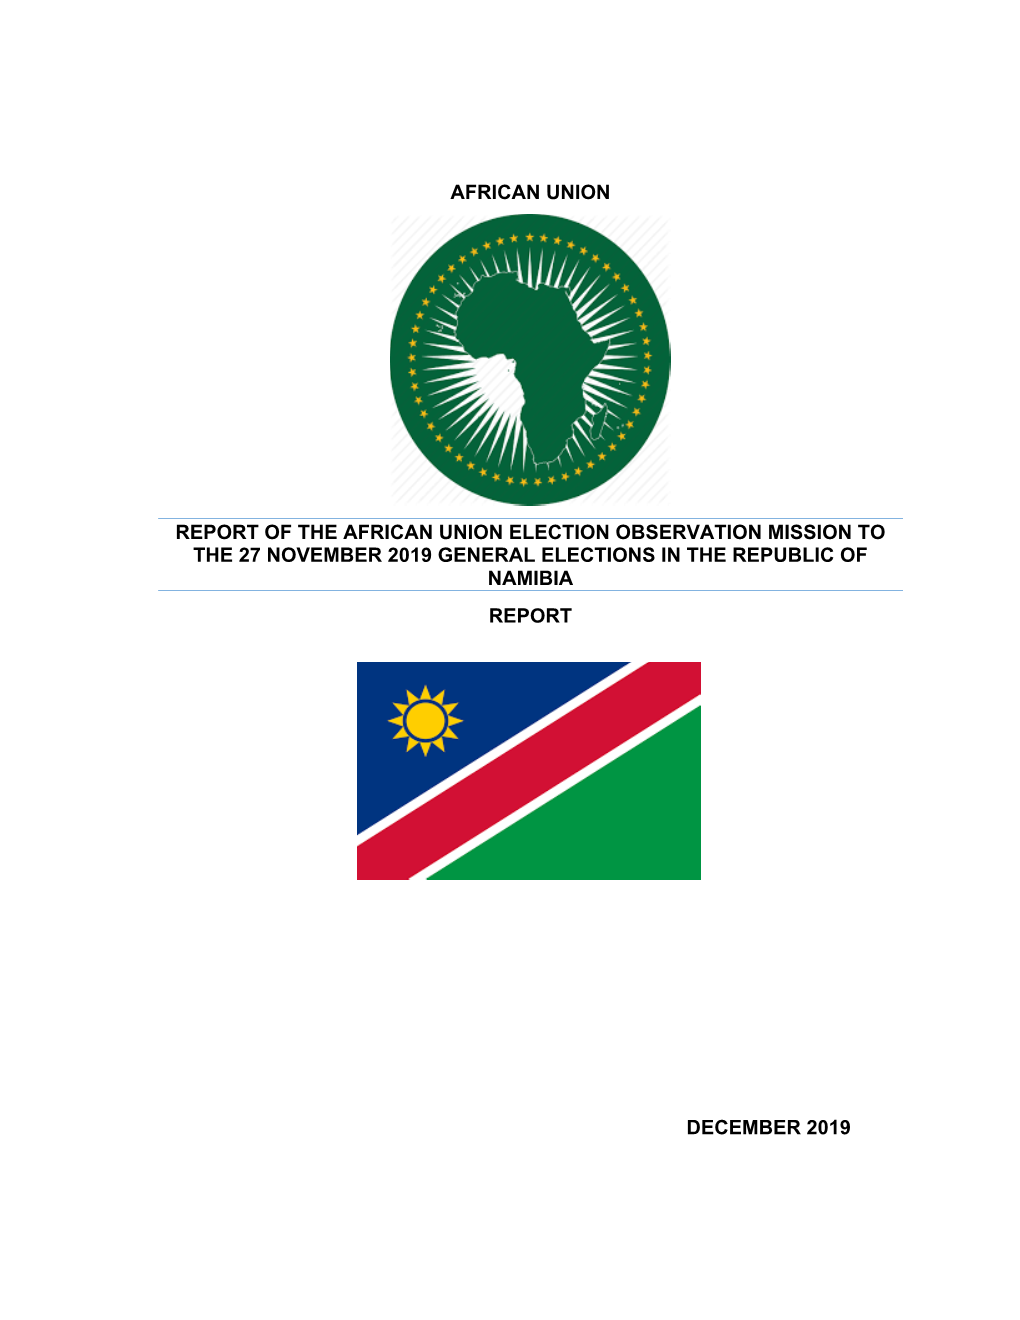 Report of the African Union Election Observation Mission to the 27 November 2019 General Elections in the Republic of Namibia Report